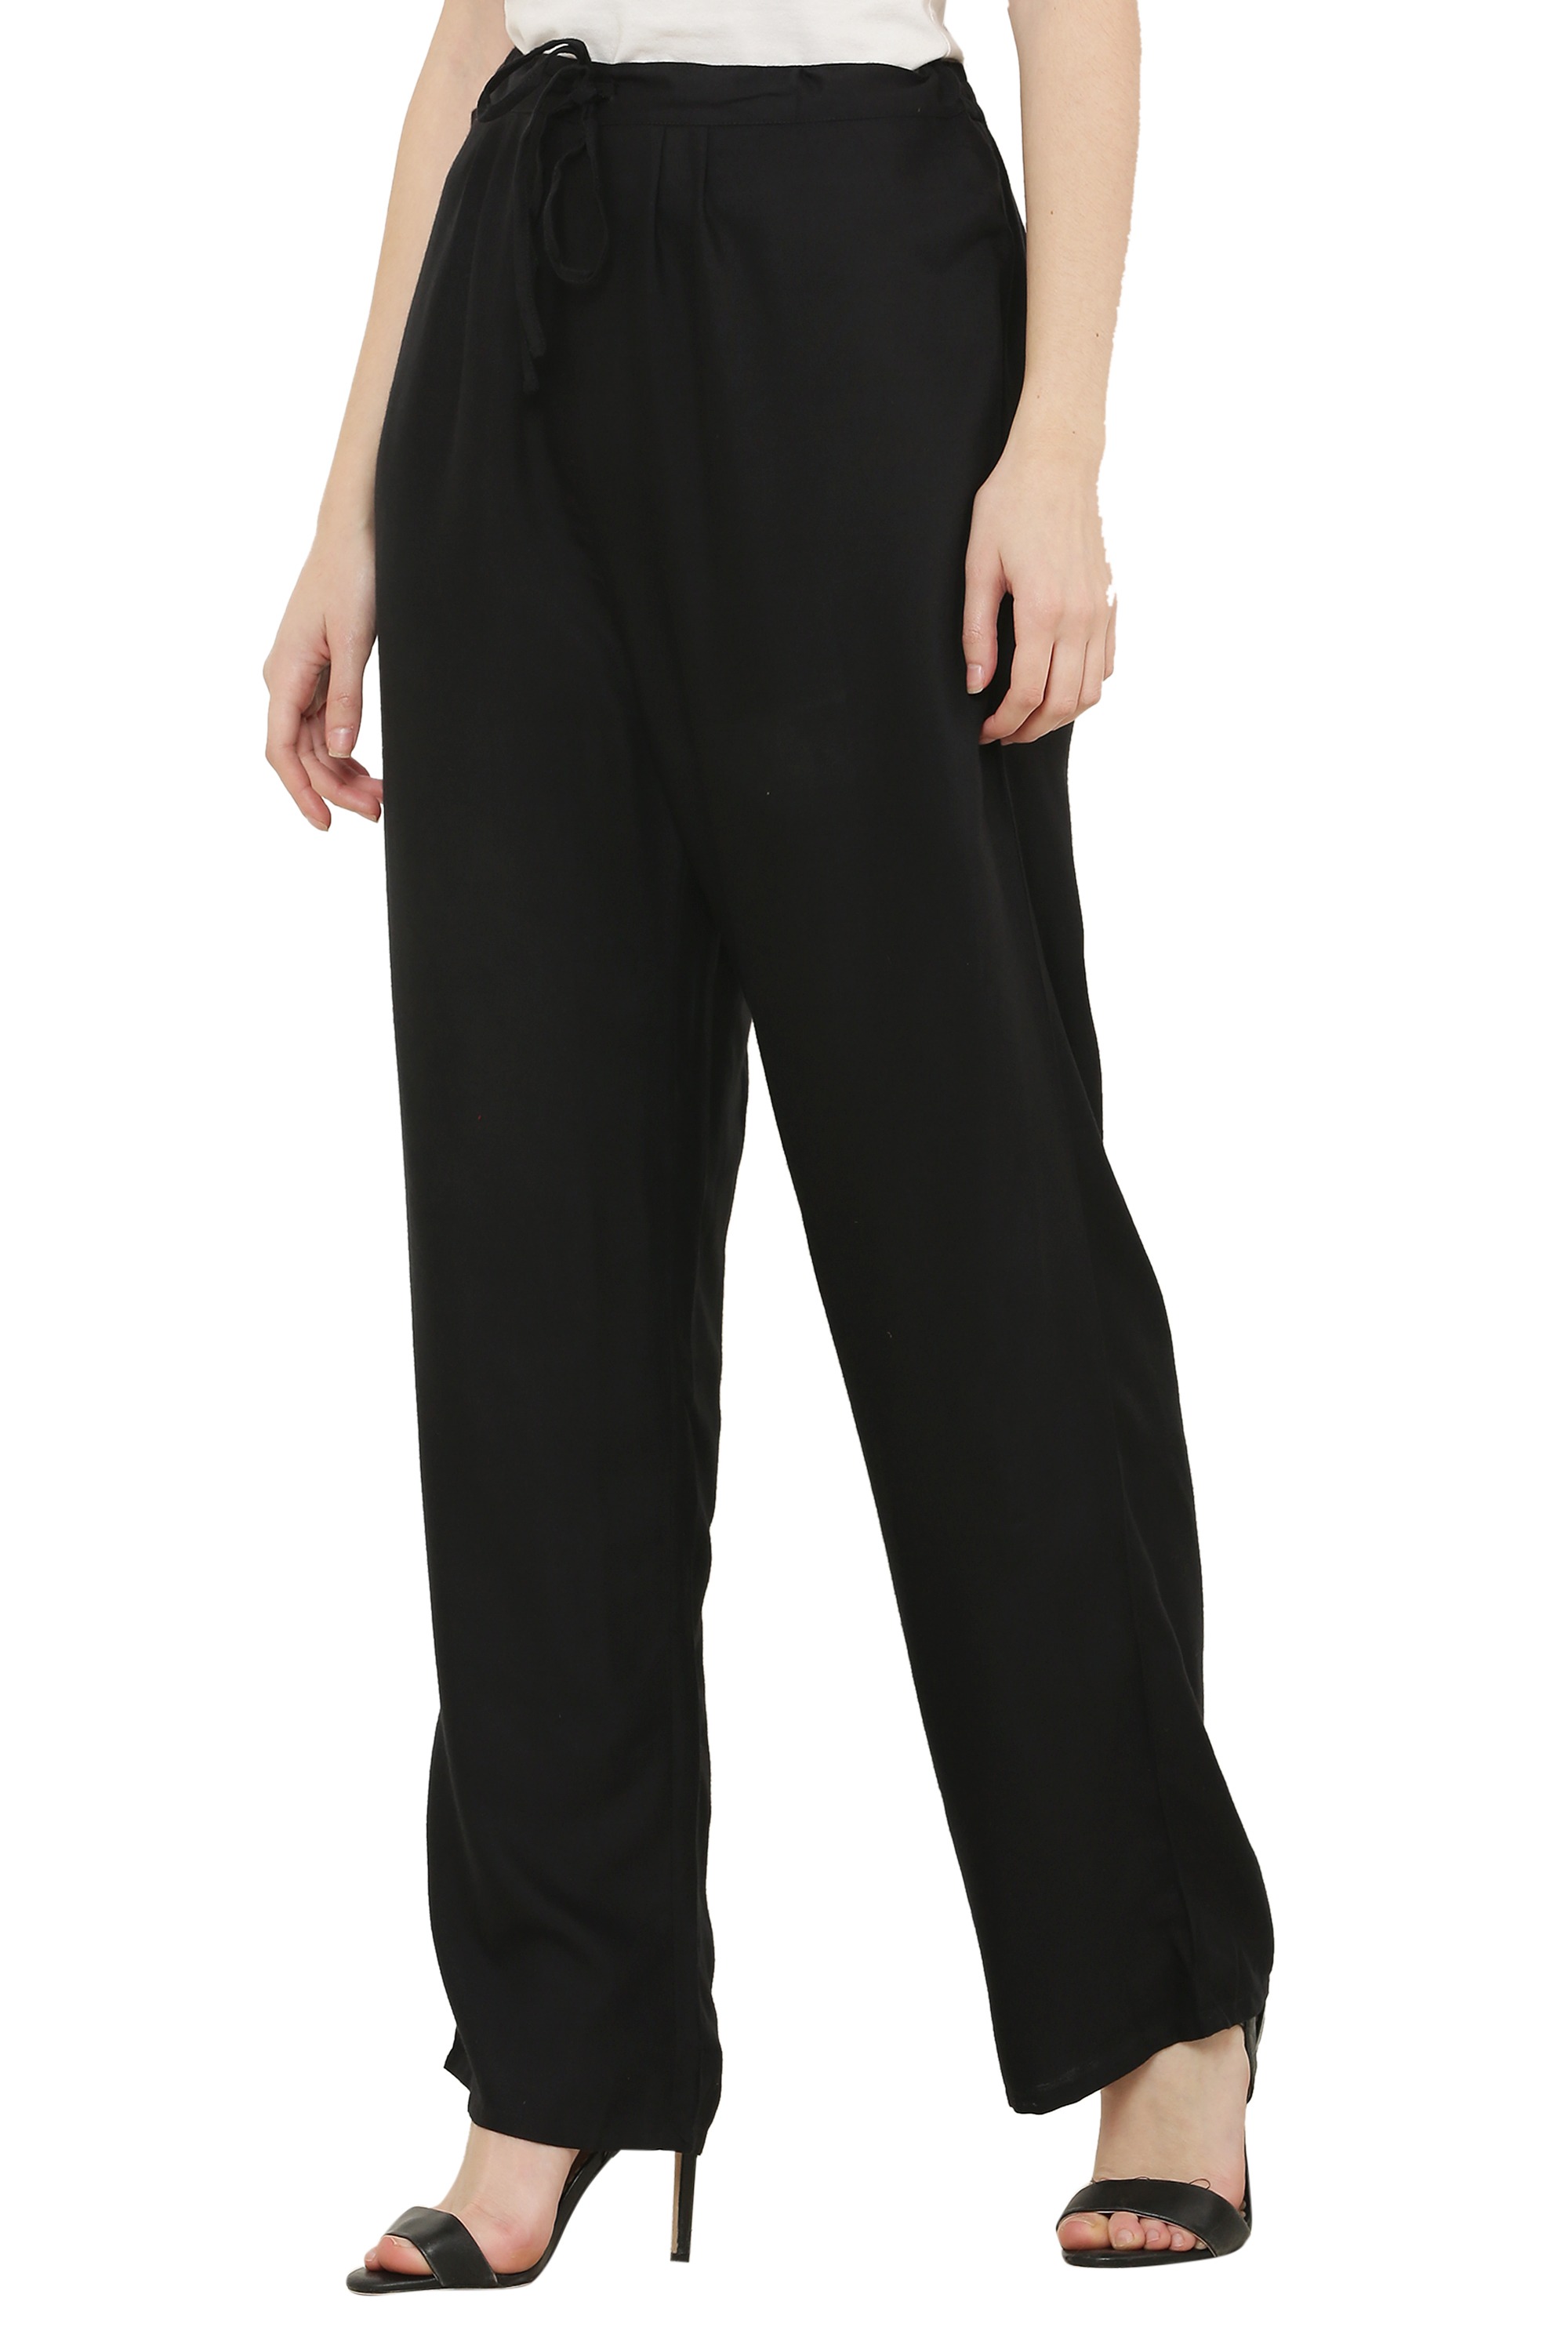 Plain solid Wide Leg Pant or Flared Trouser, Waist Size: Free size